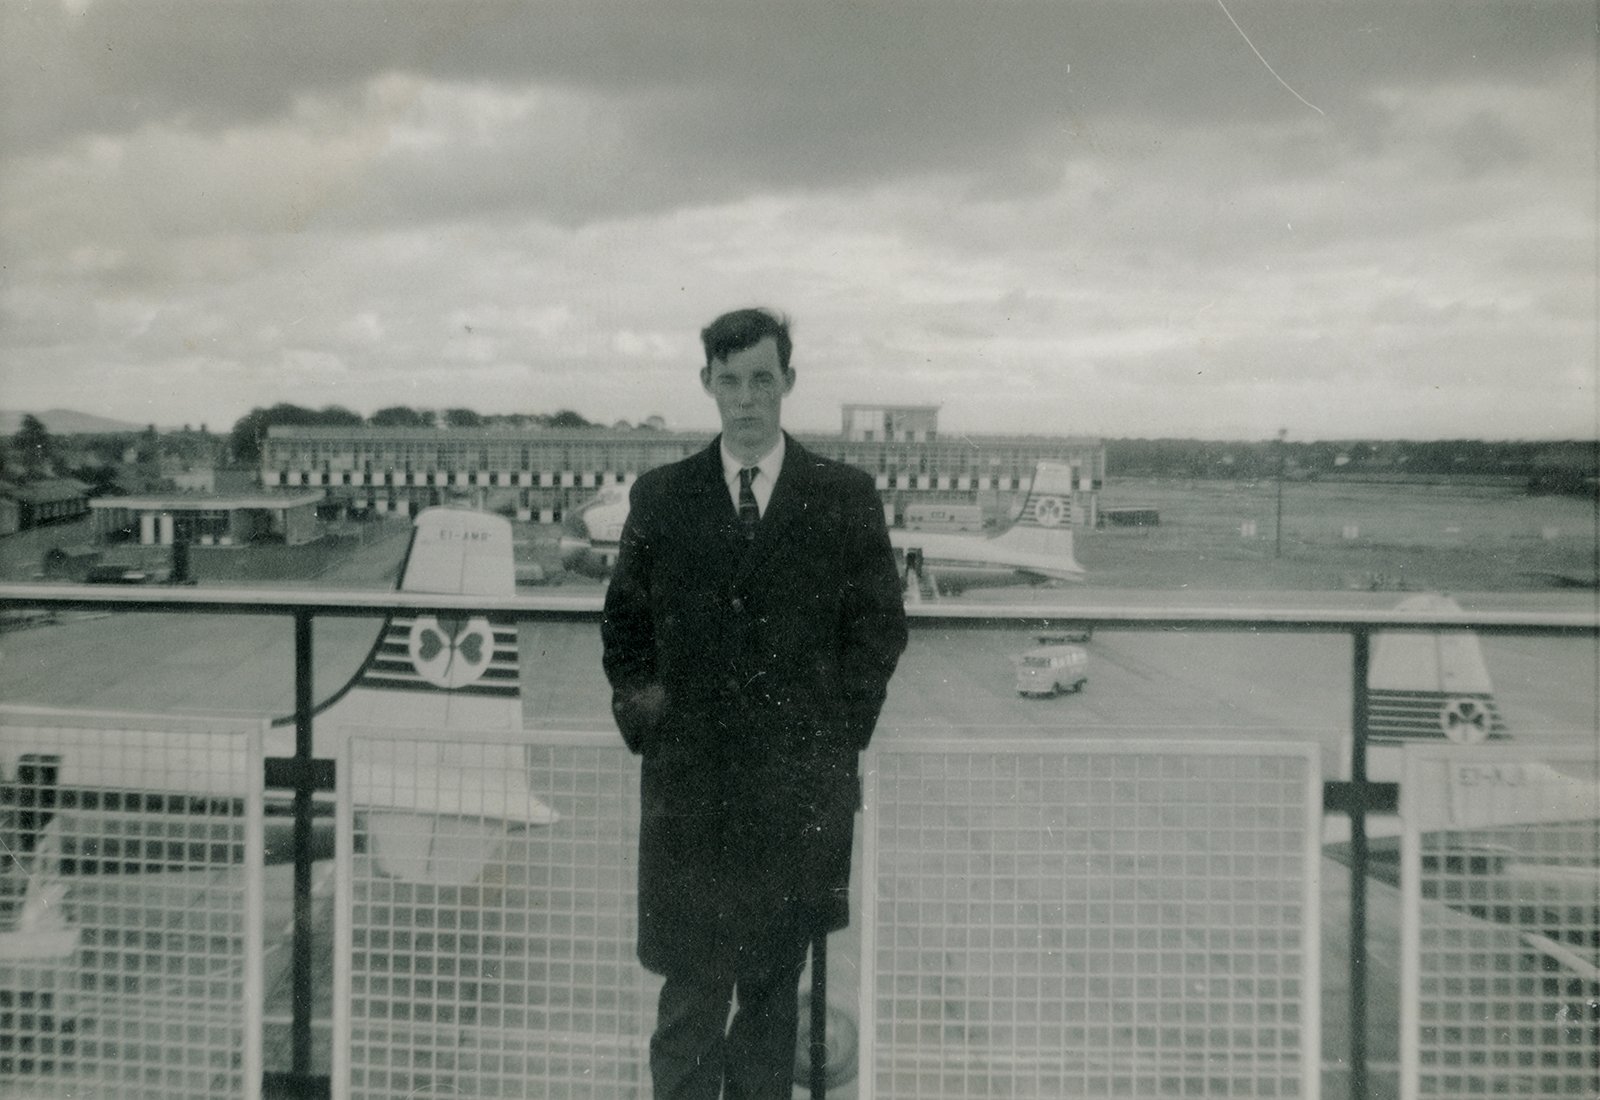 Eugene Clerkin pictured at Dublin airport, c. 1960s.